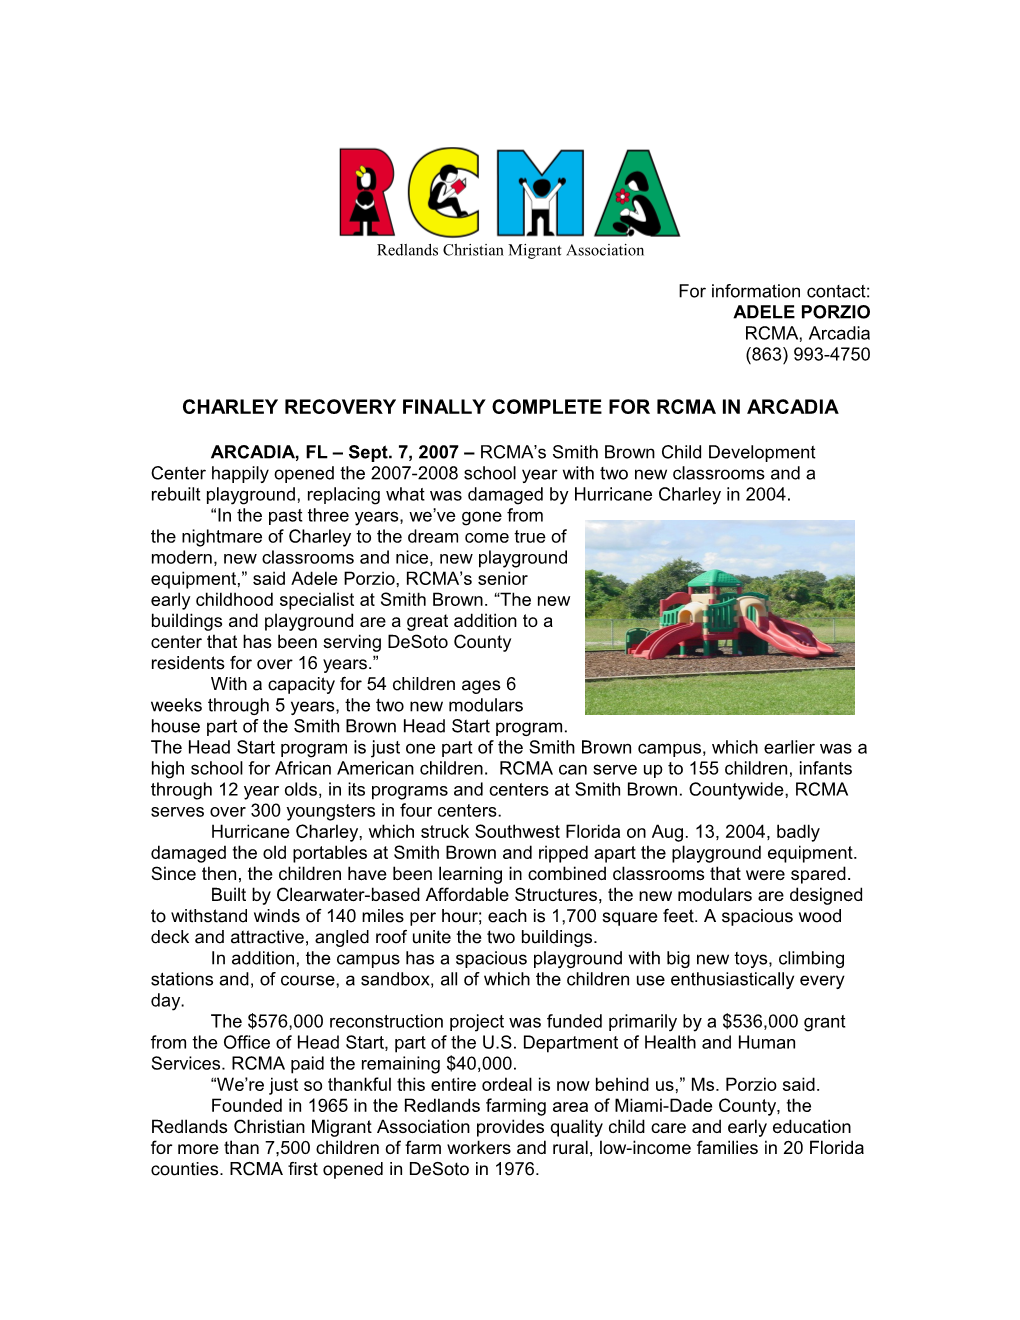 RCMA Smith Brown Child Development Center Opened the 2007-2008 School Year with Brand New